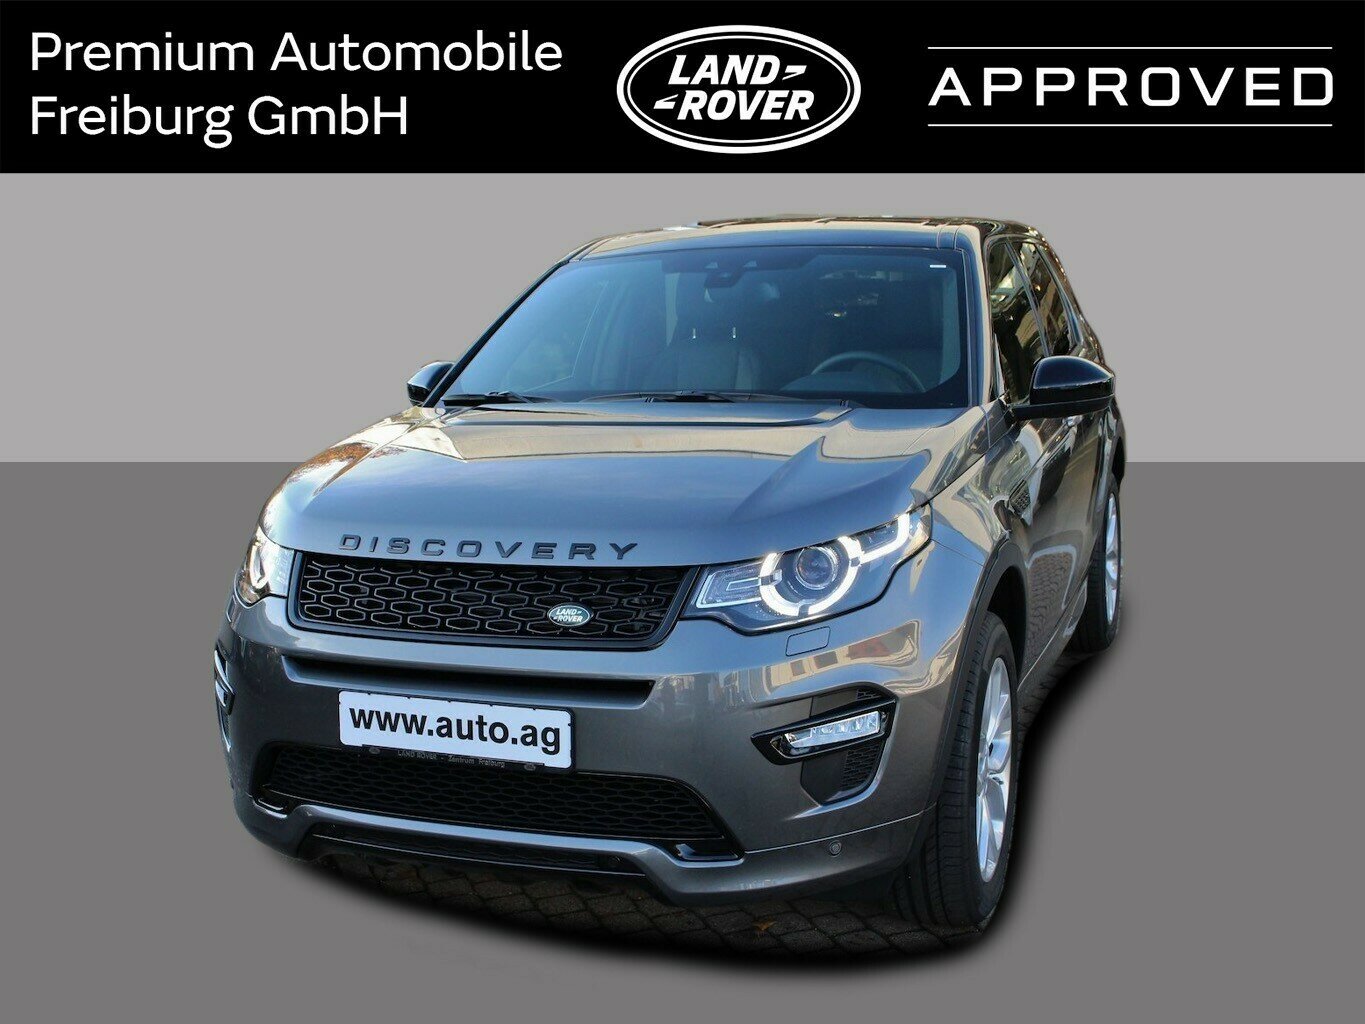 Land Rover Discovery Sport SD4 HSE DYNAMIC 240PS APPROVED